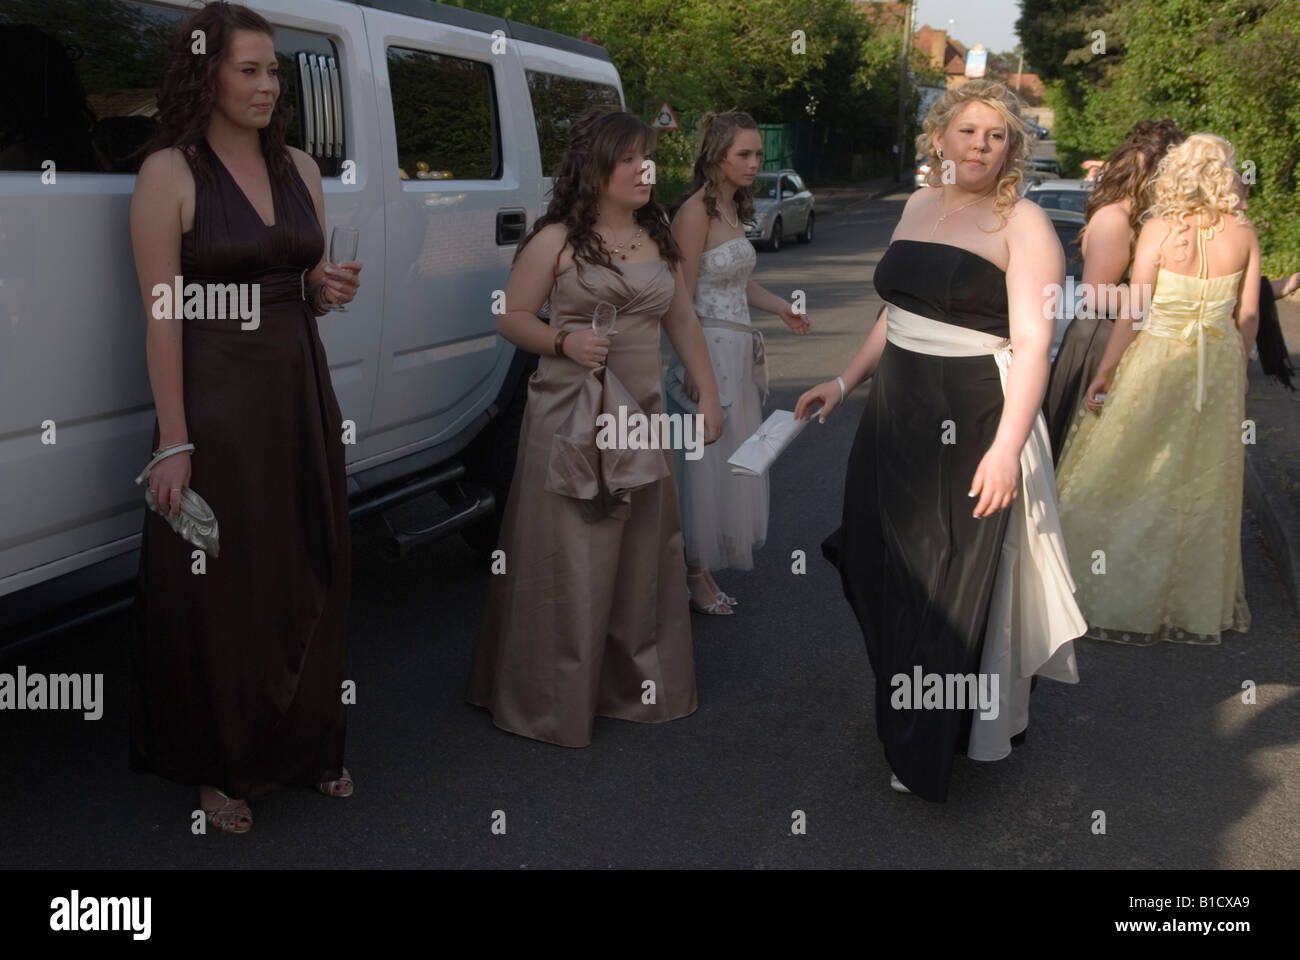 Prom party UK 2000s limousine sixteen year old teenage girls going to a leaving school prom  Surrey 2008 UK  HOMER SYKES Stock Photo